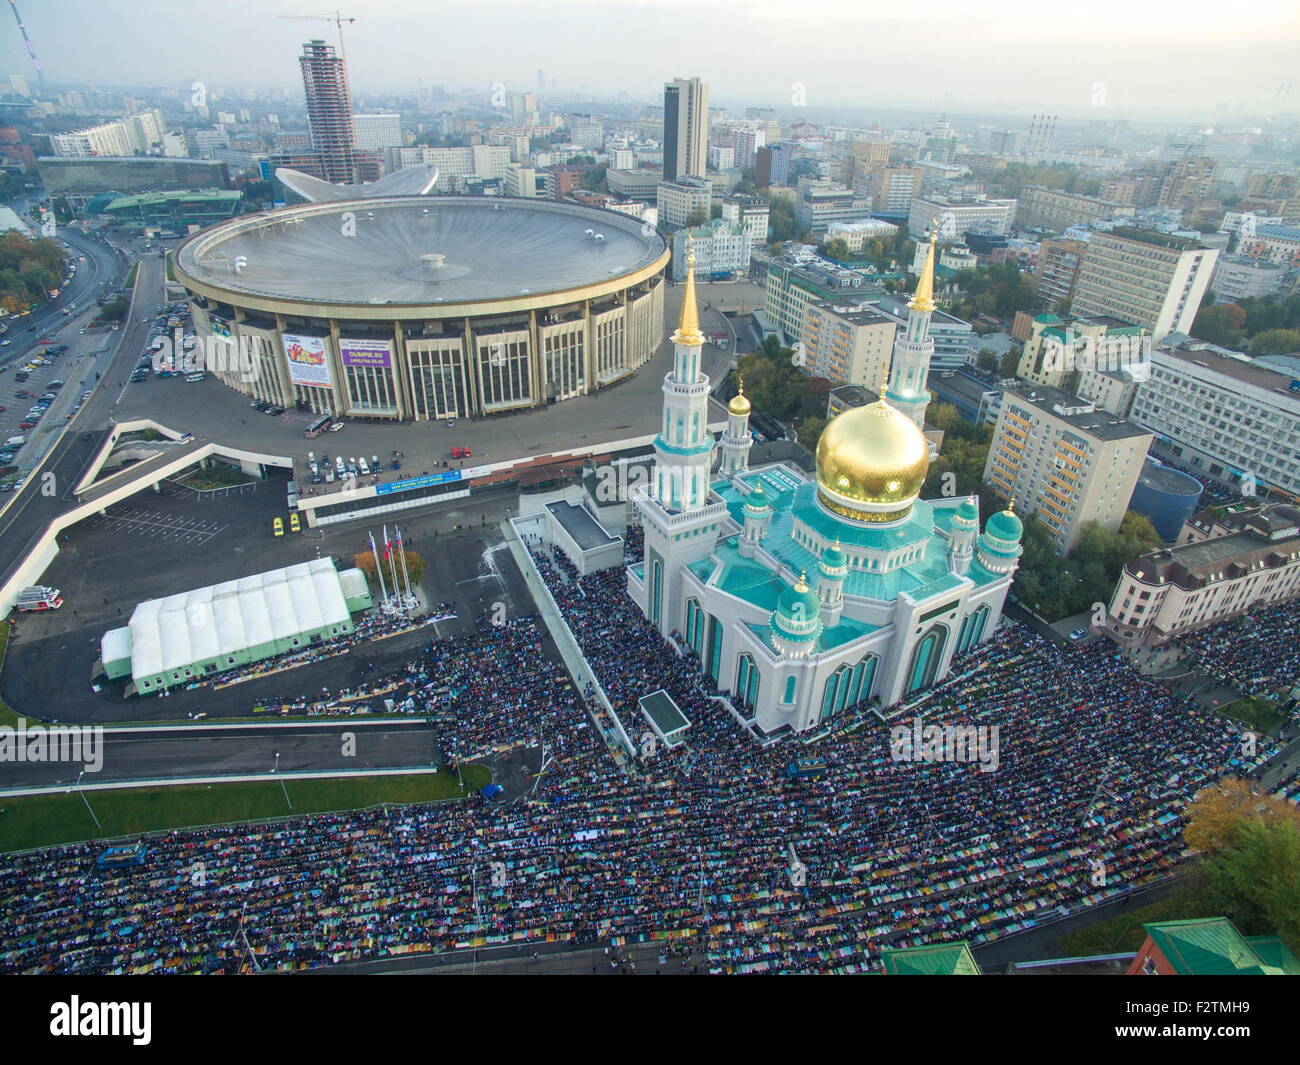 moscow-russia-24th-sep-2015-an-aerial-view-of-muslims-praying-outside-F2TMH9.jpg